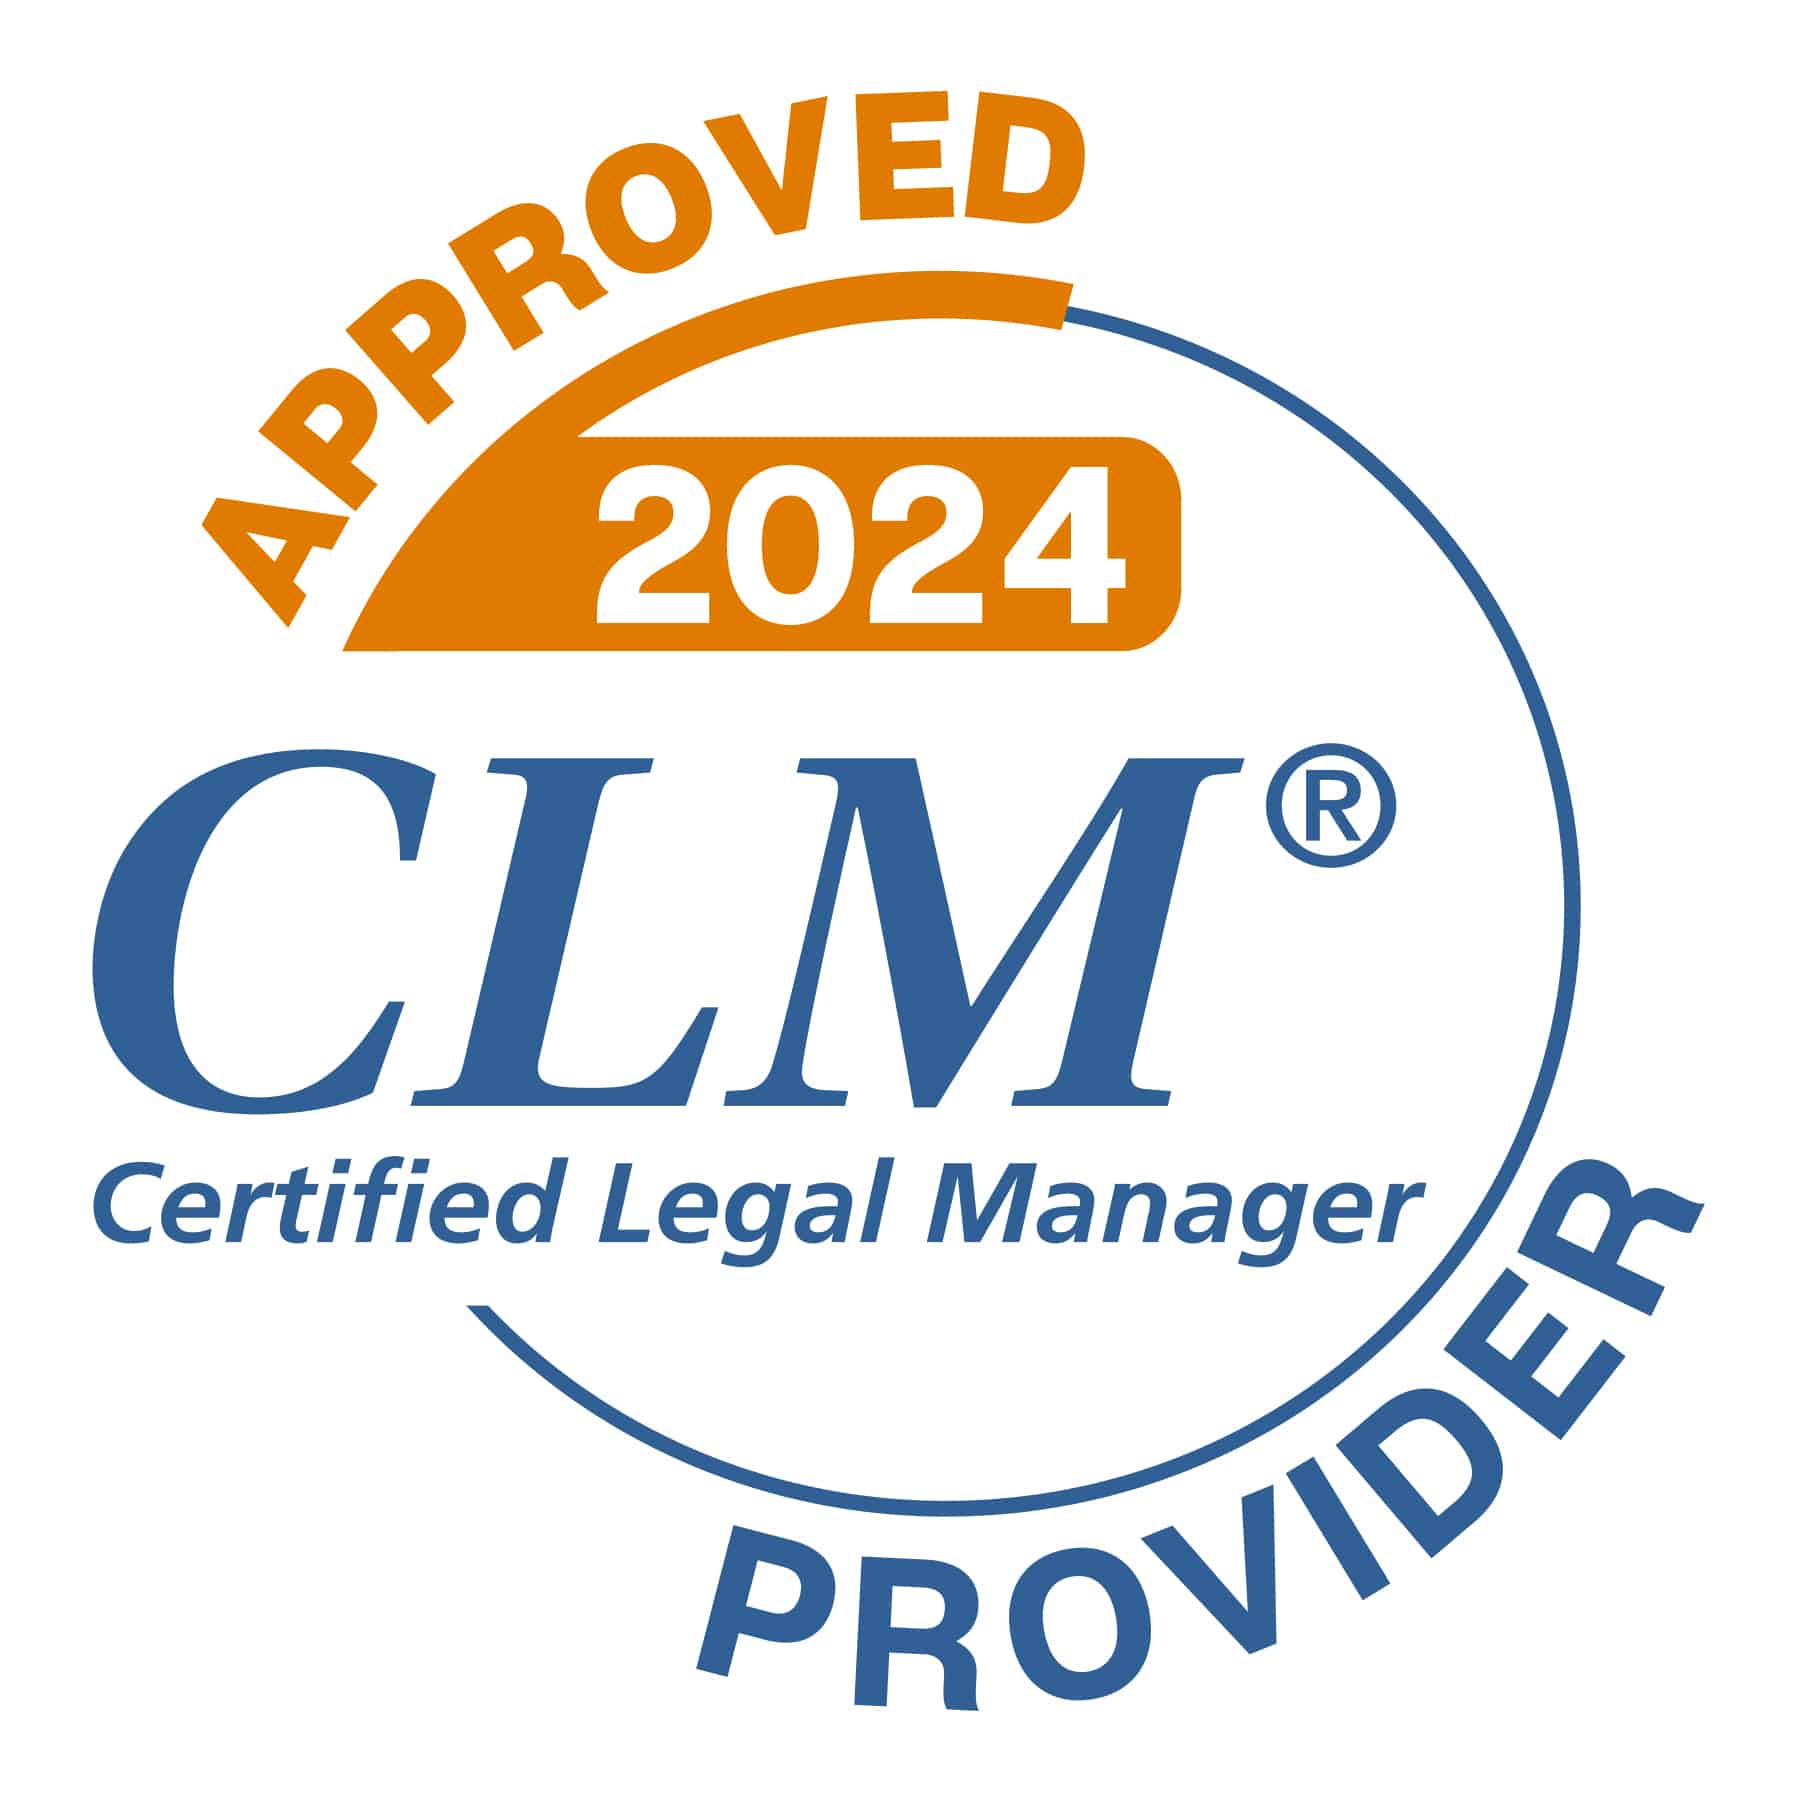 Certified Legal Manager Provider